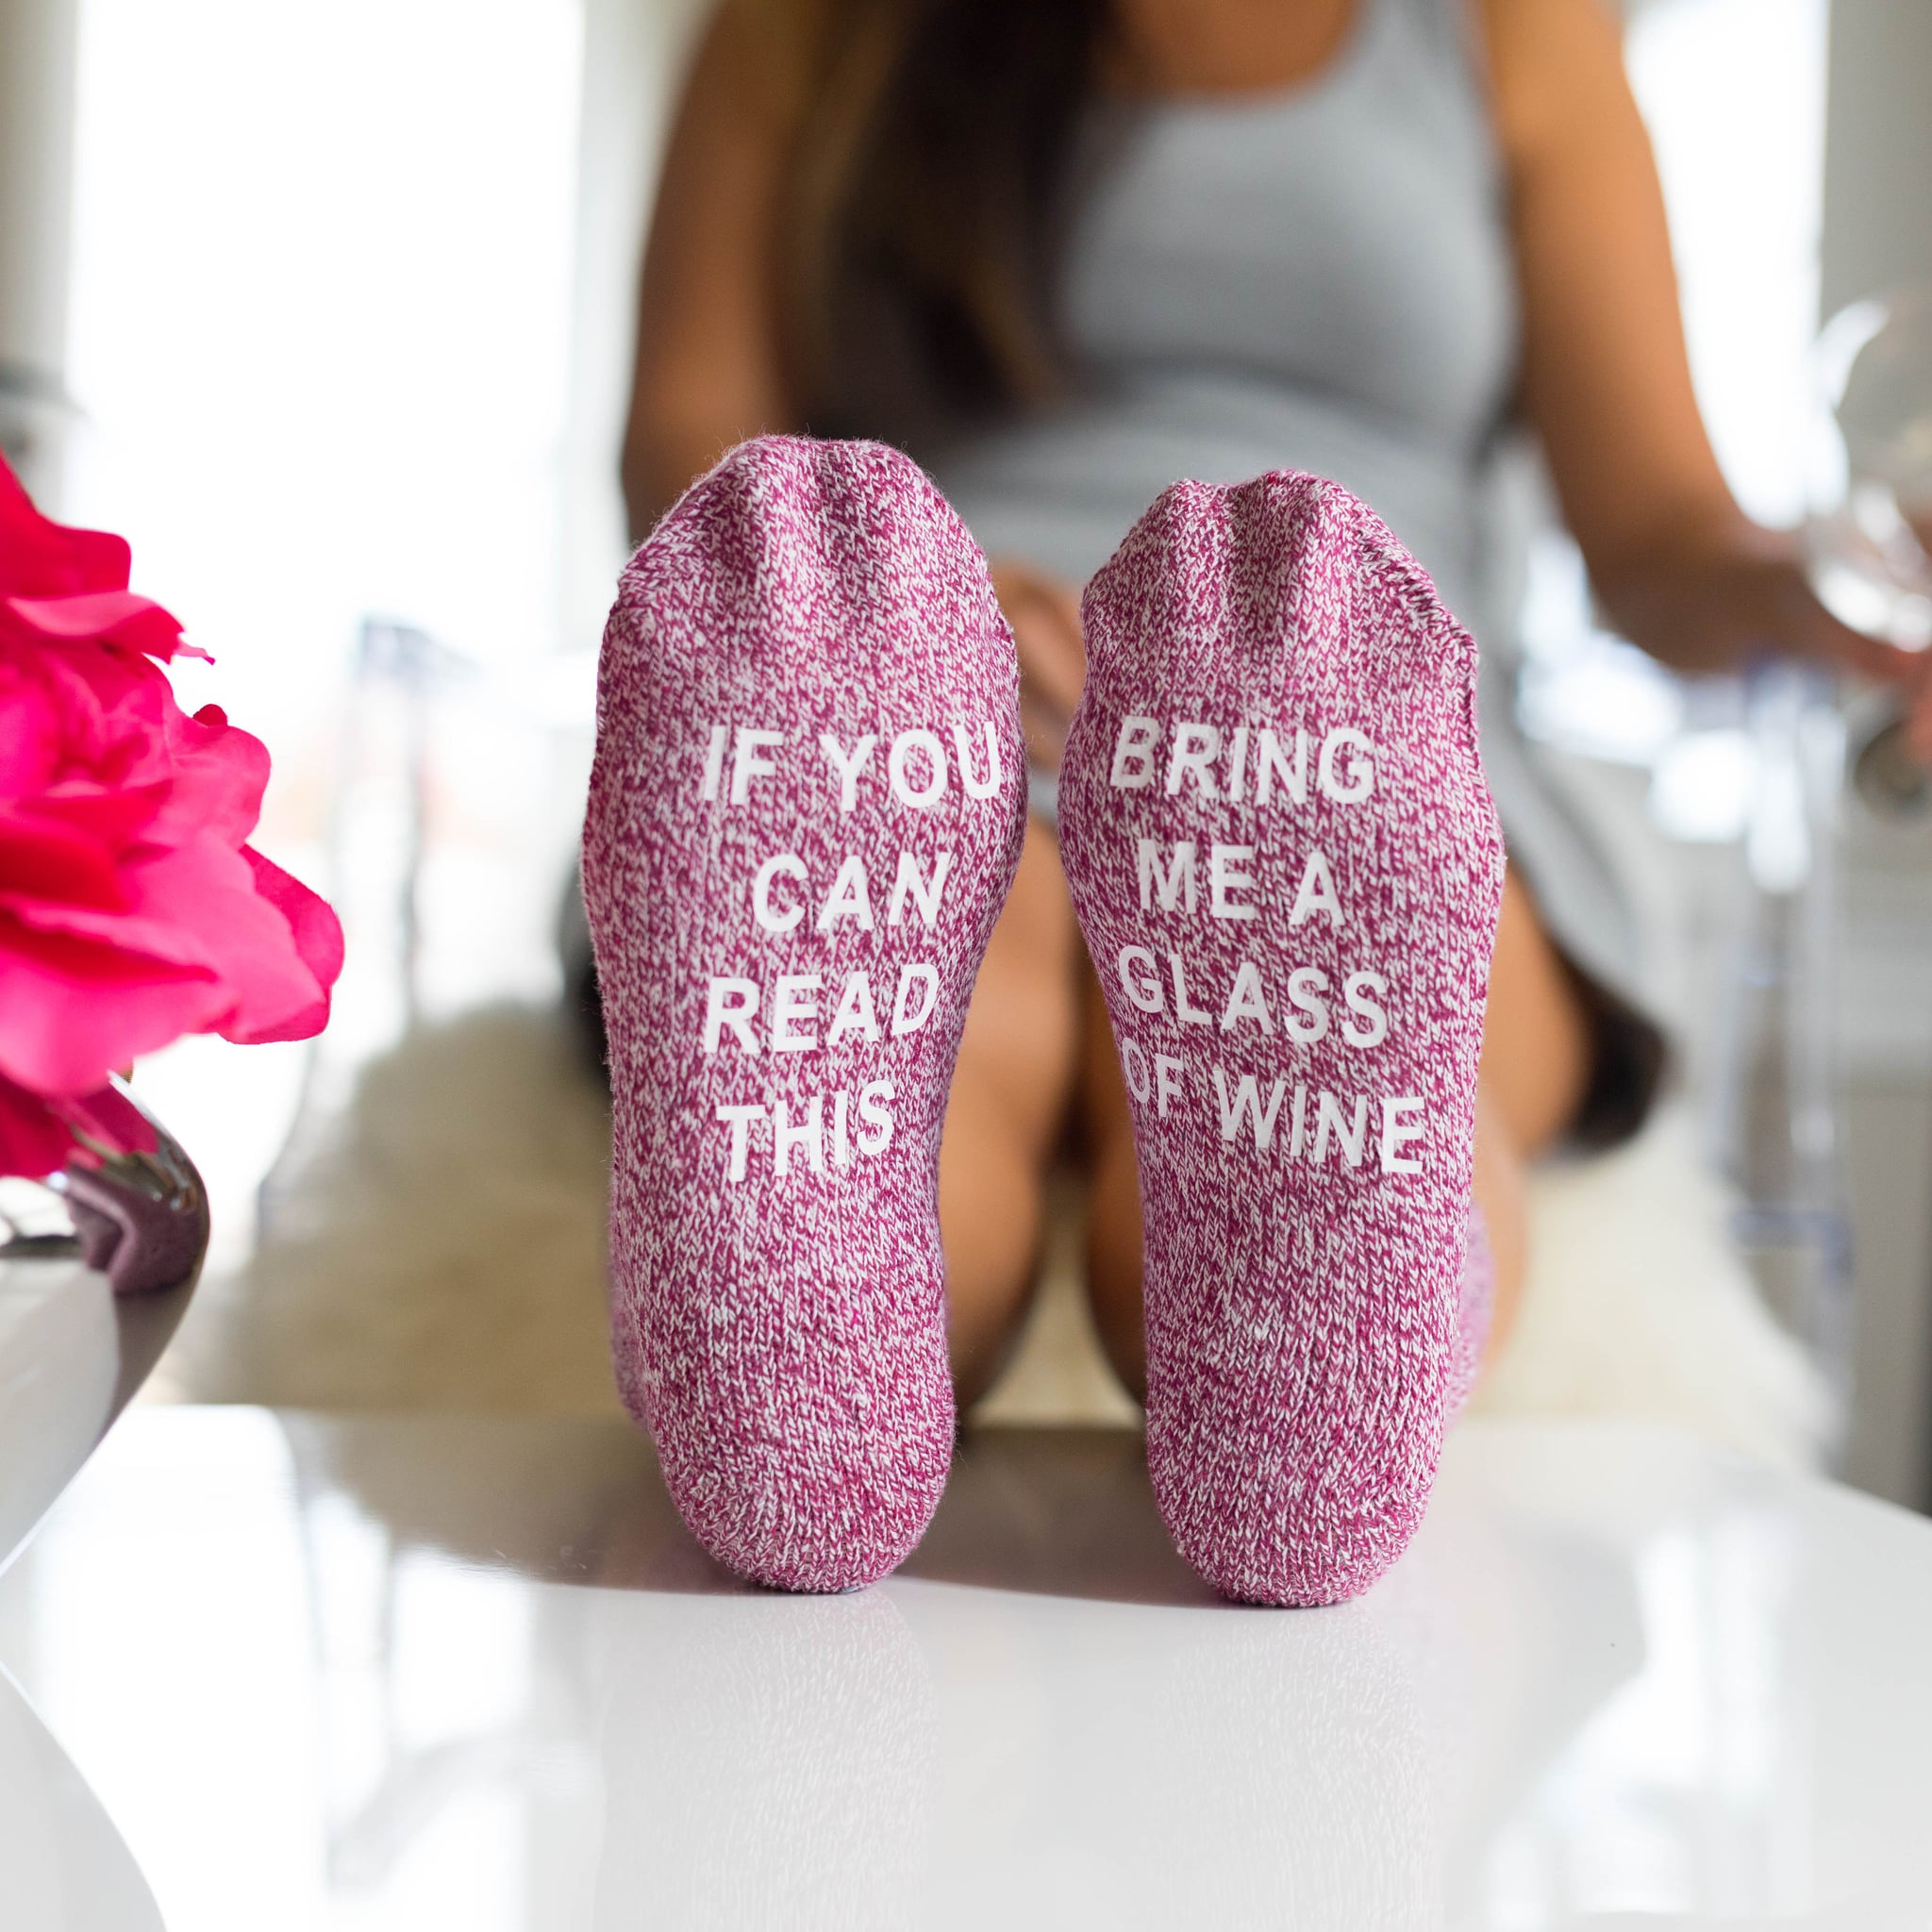 Black Wine Socks Gifts for Mom/Women/Men/Dad/Wife/Her/Wine Lover If You Can Read This Socks Bring Me Some Wine Cotton Novelty Funny Socks Unique Gift Idea for Birthday Hostess Housewarming Mom Gifts 